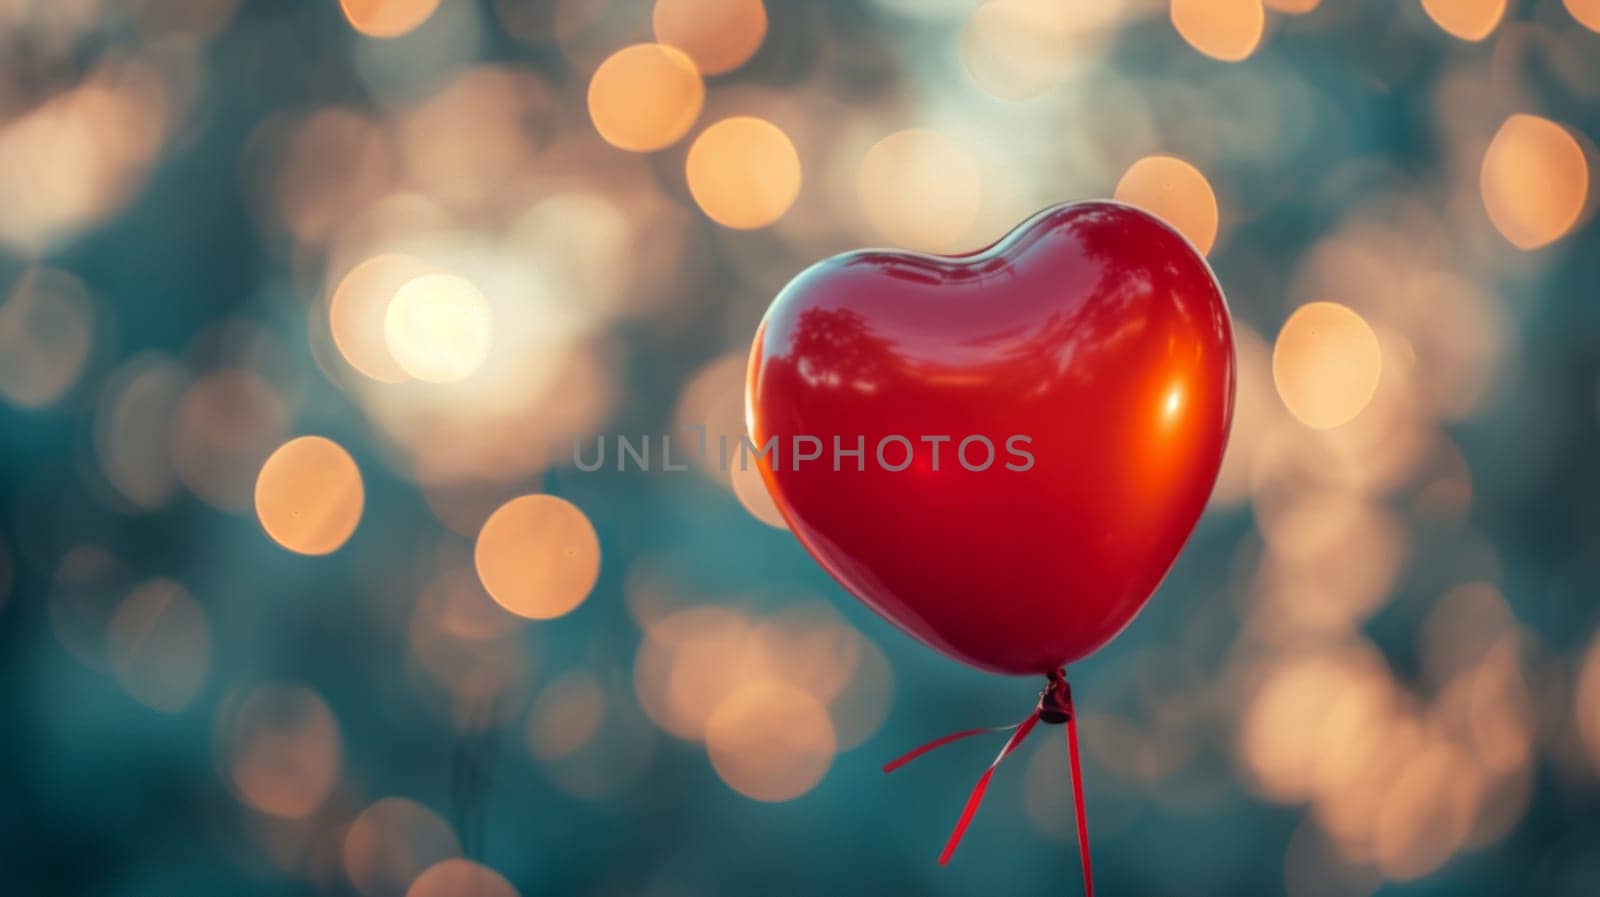 Valentine's day abstract background with red balloon on blurred background.